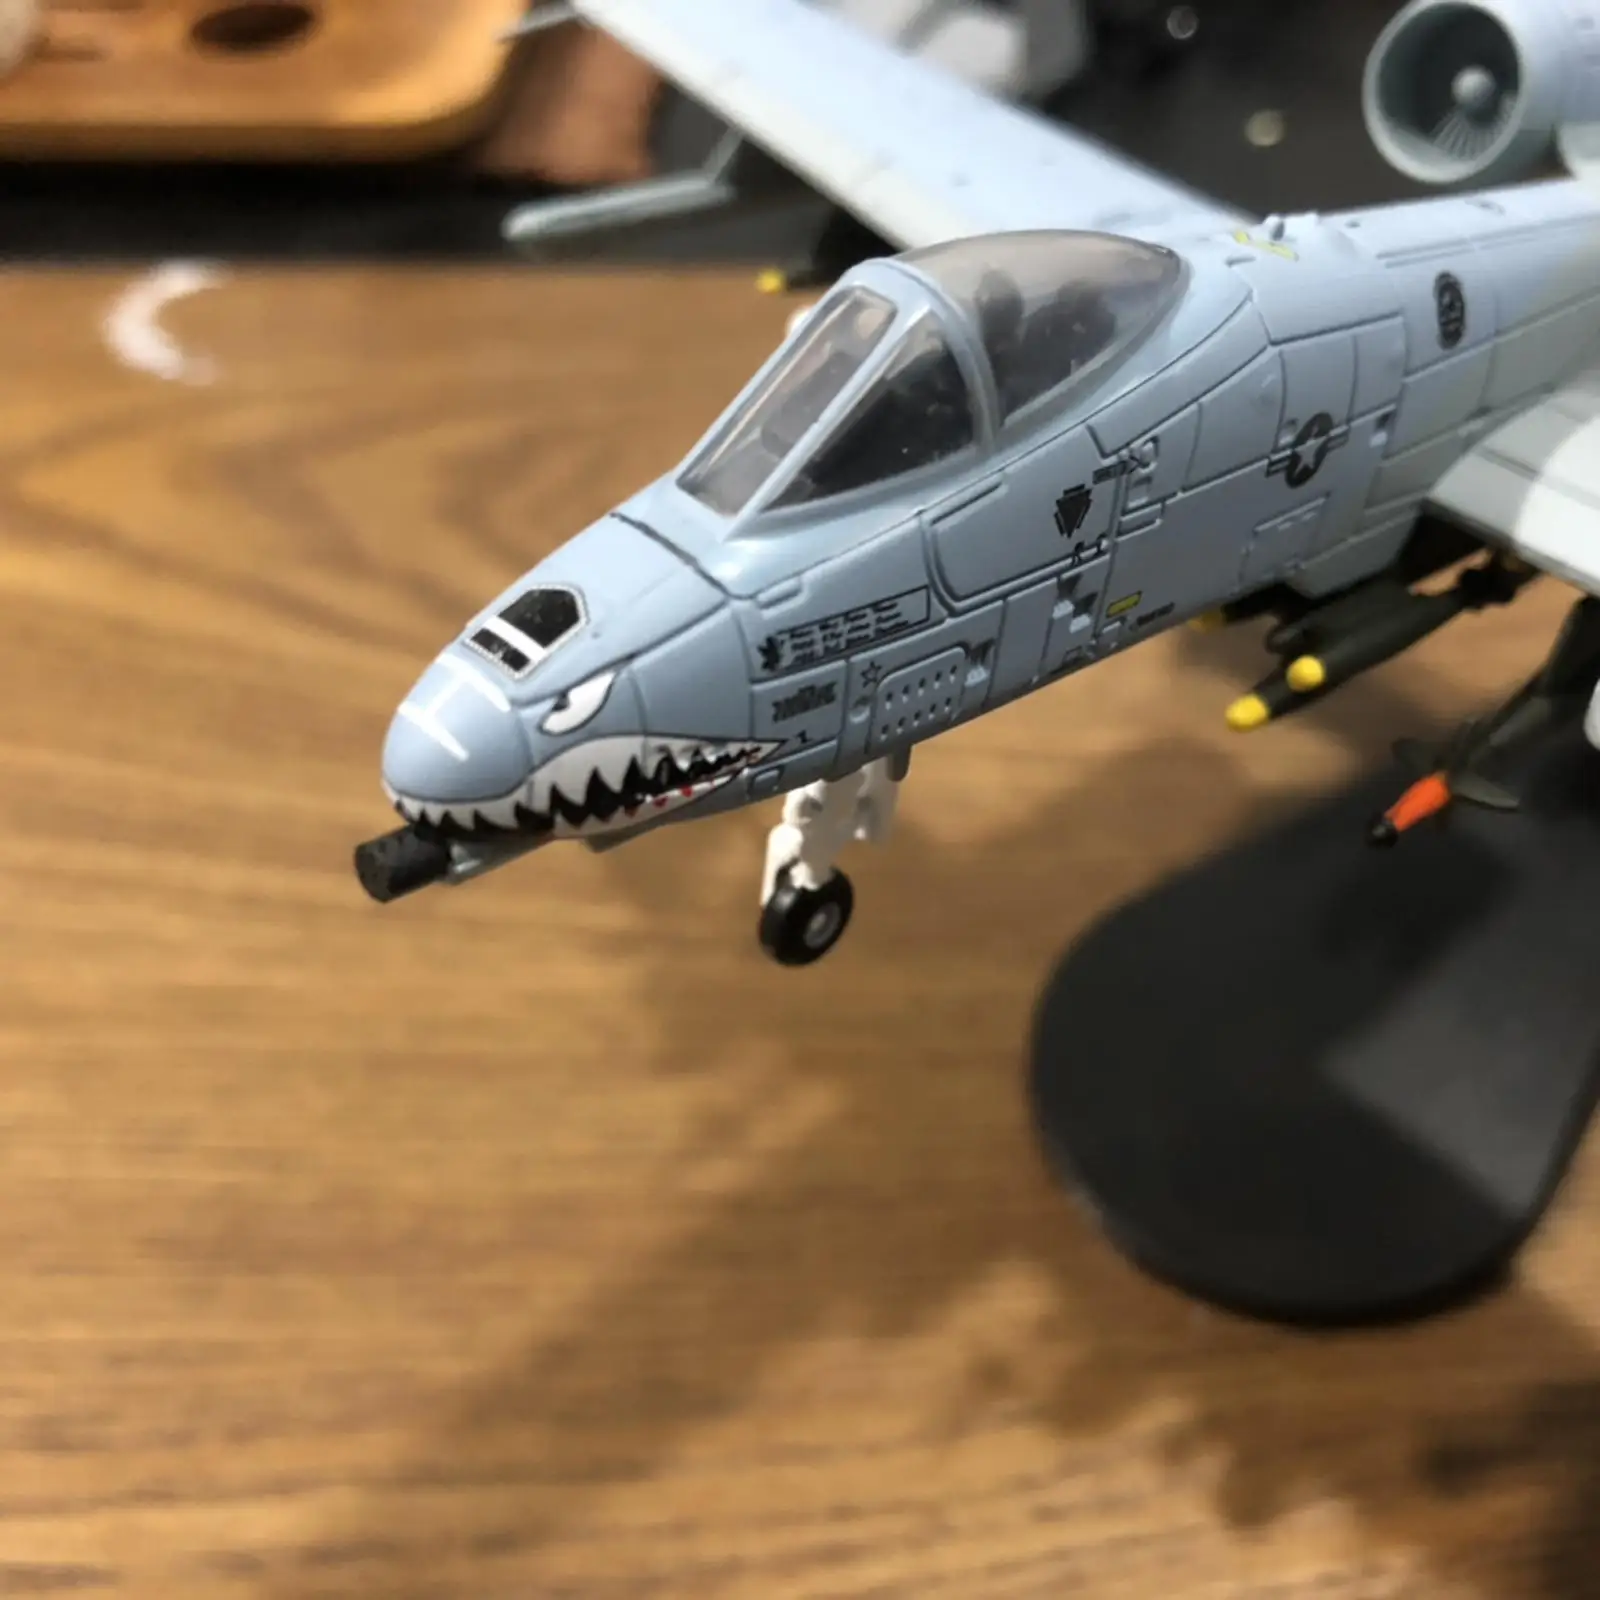 Baoblaze USA A-10 Attacker Aircraft 1:100 Scale Warthog Diecast Display Model with Stand Home Office Decoration or Gift